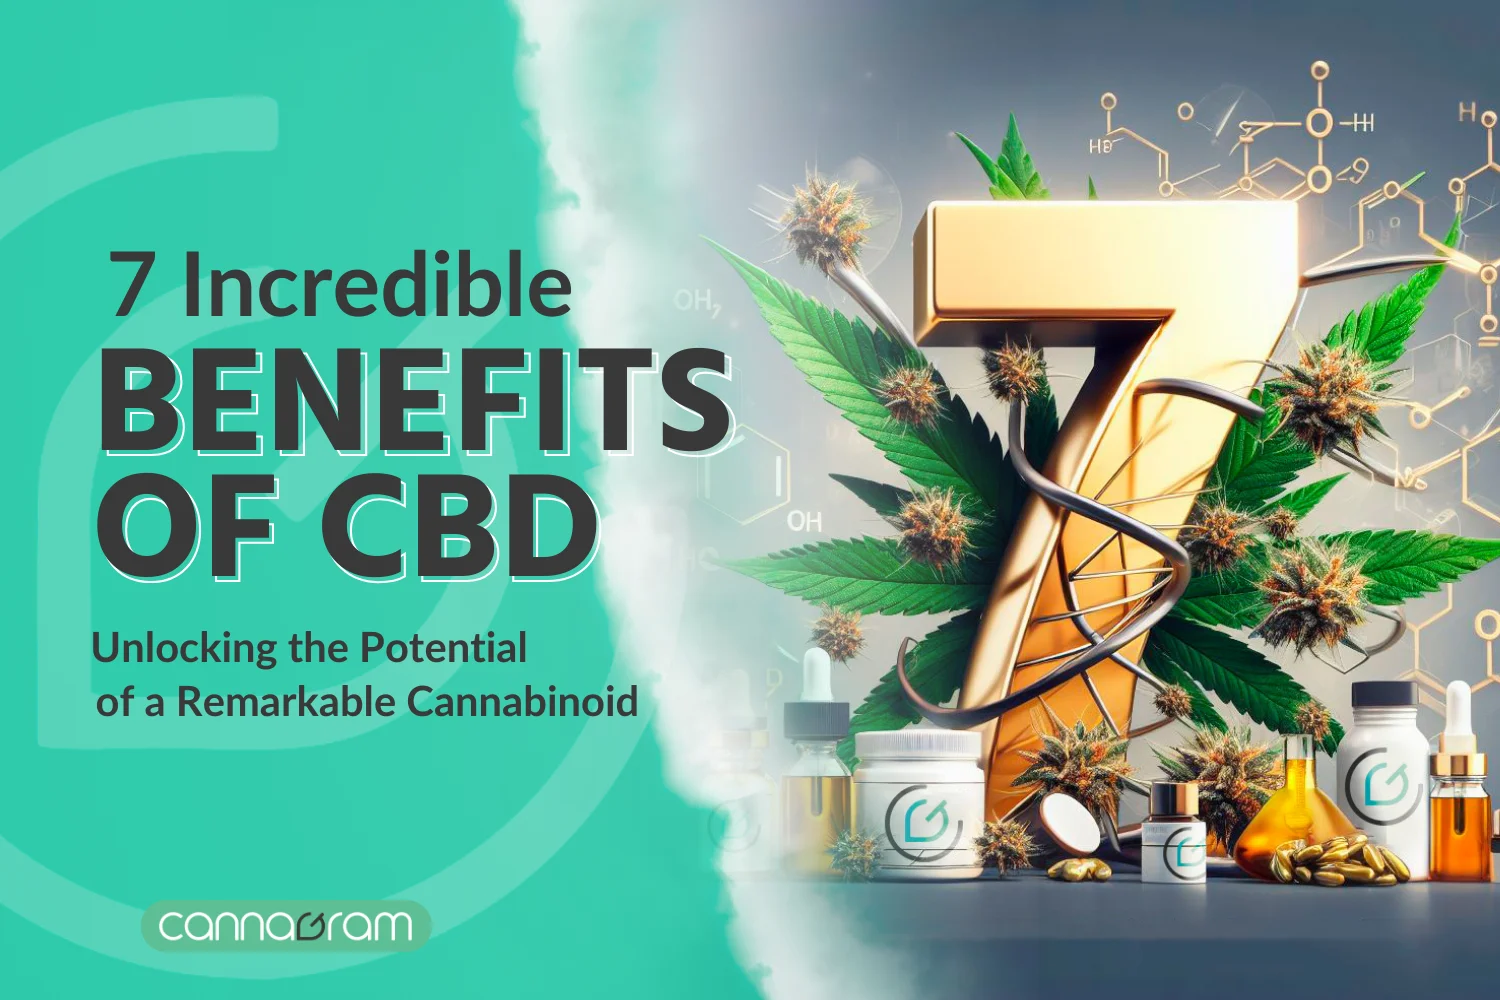 7-Benefits-of-CBD-Incredible-Benefits-of-CBD-Unlocking-the-Potential-of-a-Remarkable-Cannabinoid-by-cannabis-delivery-sacramento-cannagram